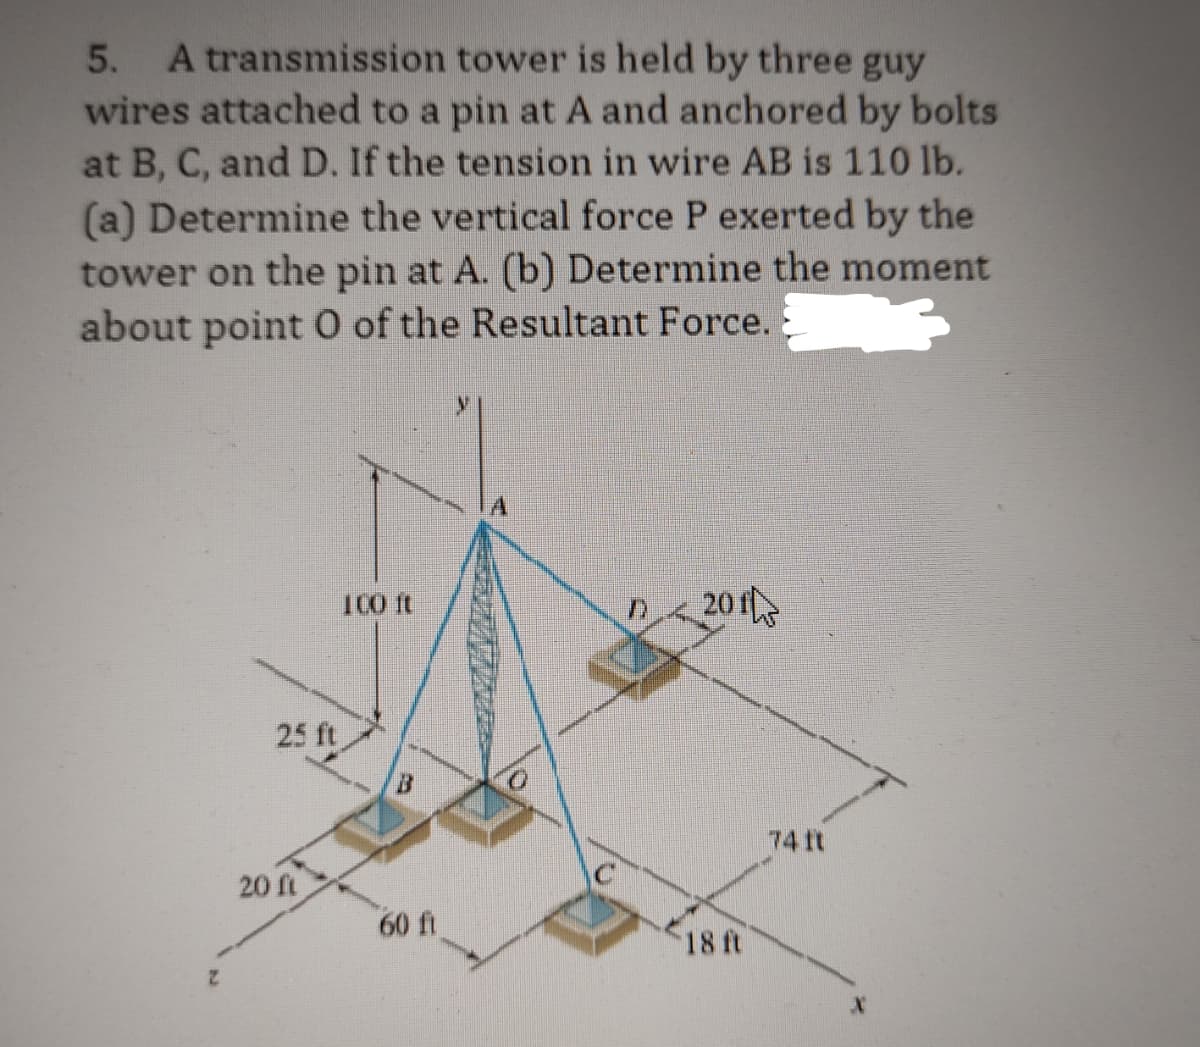 5. A transmission tower is held by three guy
wires attached to a pin at A and anchored by bolts
at B, C, and D. If the tension in wire AB is 110 lb.
(a) Determine the vertical force P exerted by the
tower on the pin at A. (b) Determine the moment
about point 0 of the Resultant Force.
25 ft
20 ft
100 ft
60 ft
V
201
18 ft
74 It
X